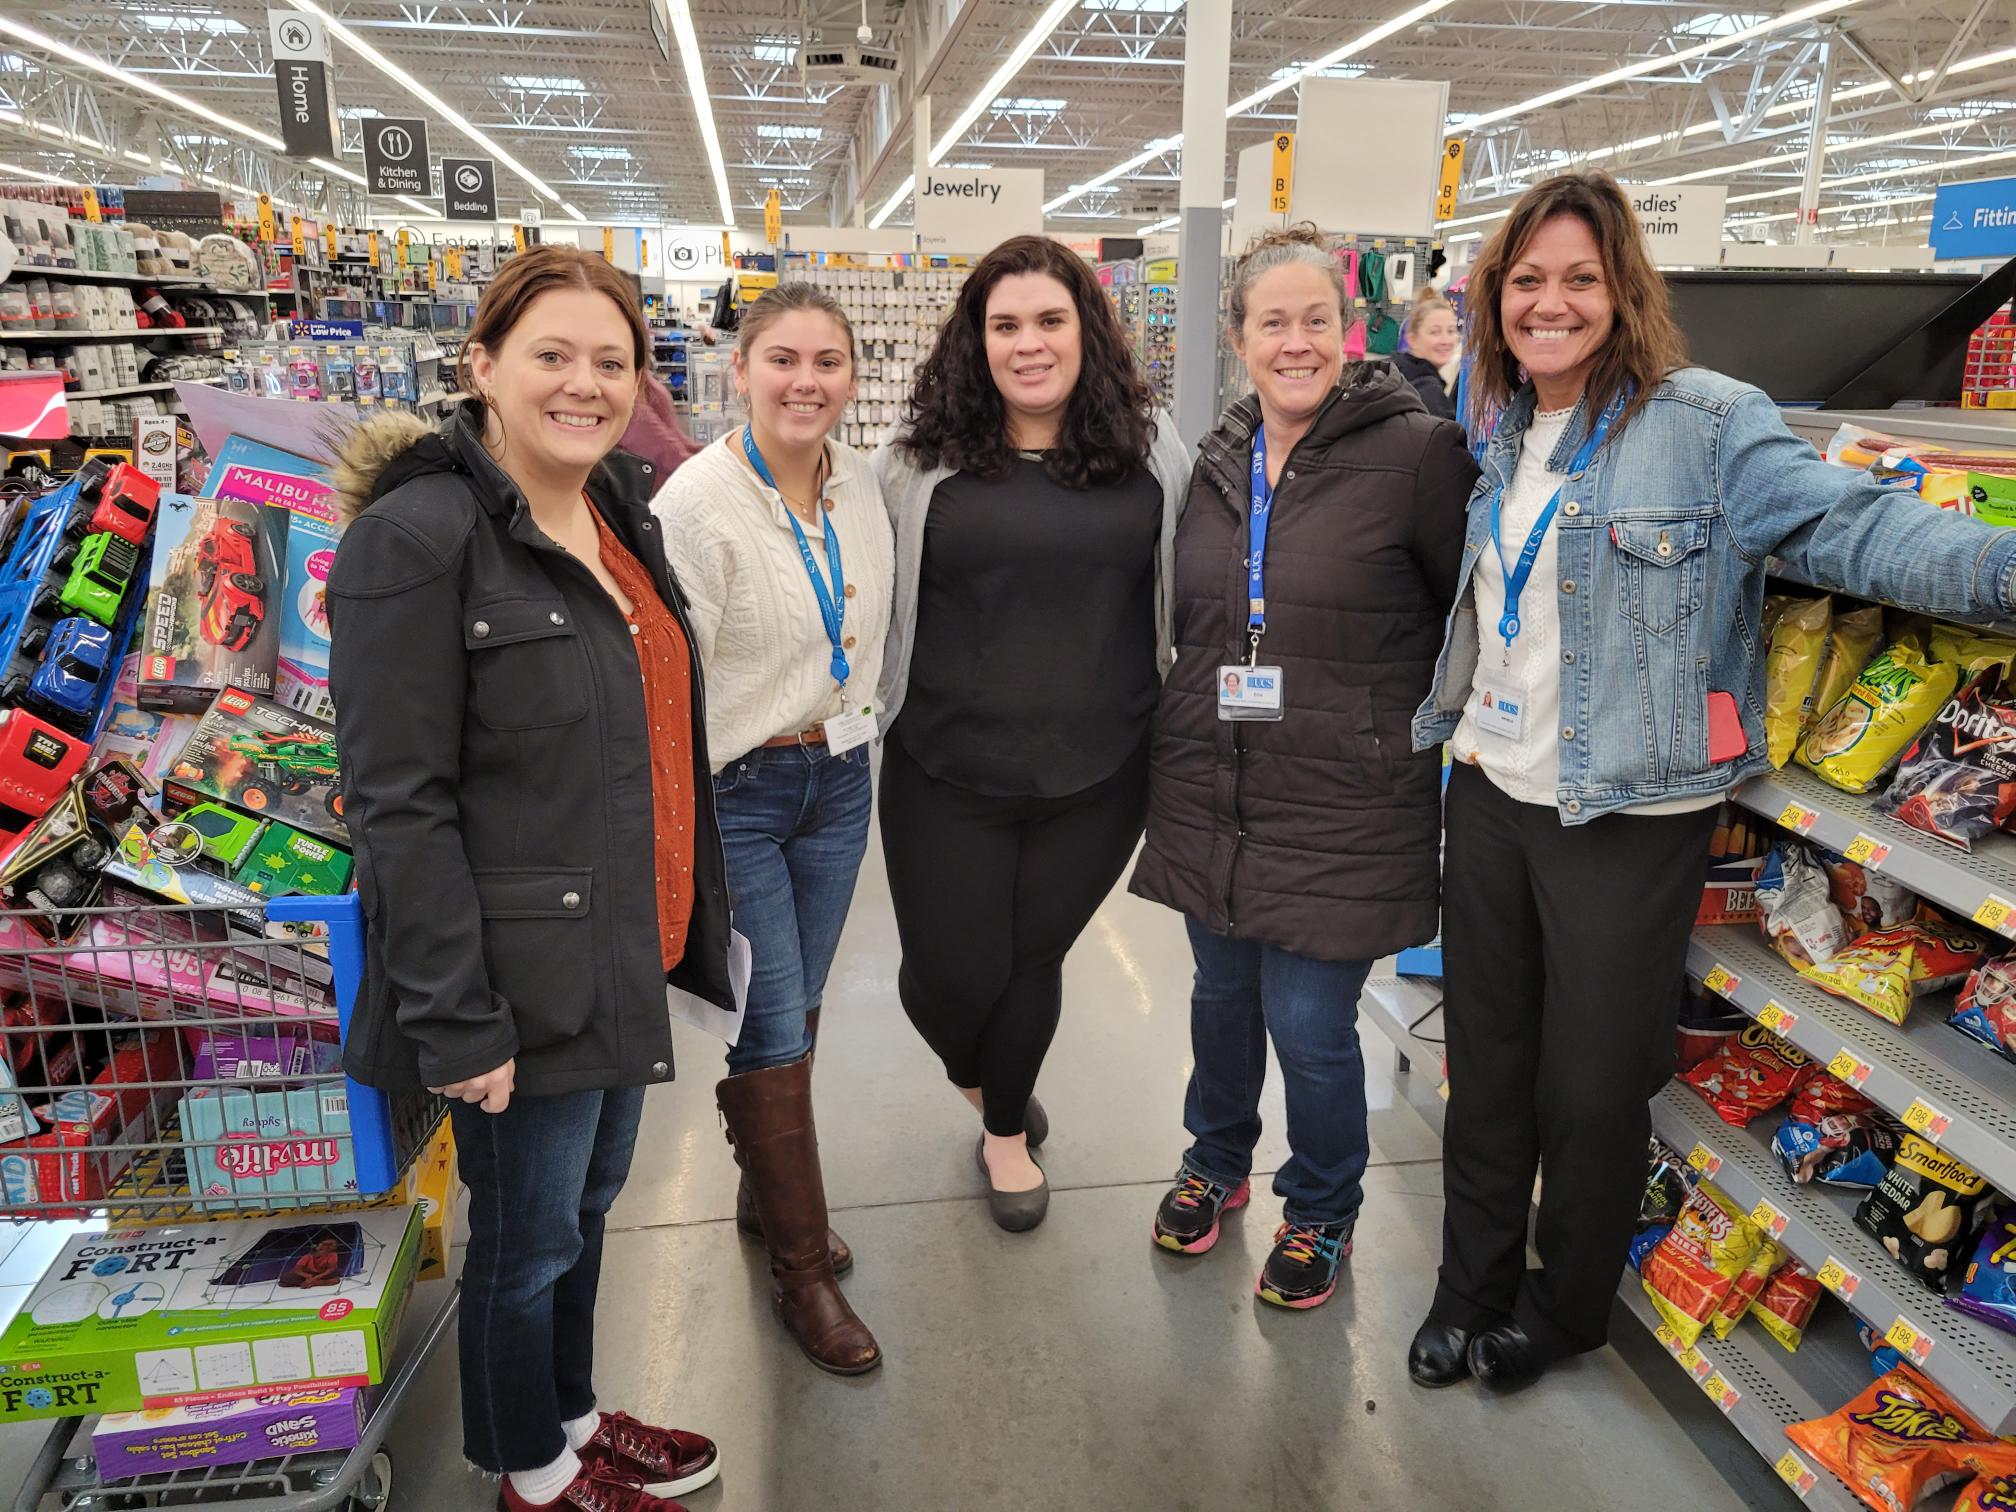 Five smiling women, some wearing blue name tag lanyards, stand together in a brightly lit store setting. They are surrounded by brightly colored store items. Left to right: Woman with orange sweater and red hair, woman with white shirt with light brown hair tied back, woman with black curly hair wearing all black, woman with silver-brown curly hair wearing a brown winter coat, and a woman with brown hair wearing a white shirt and denim jacket.